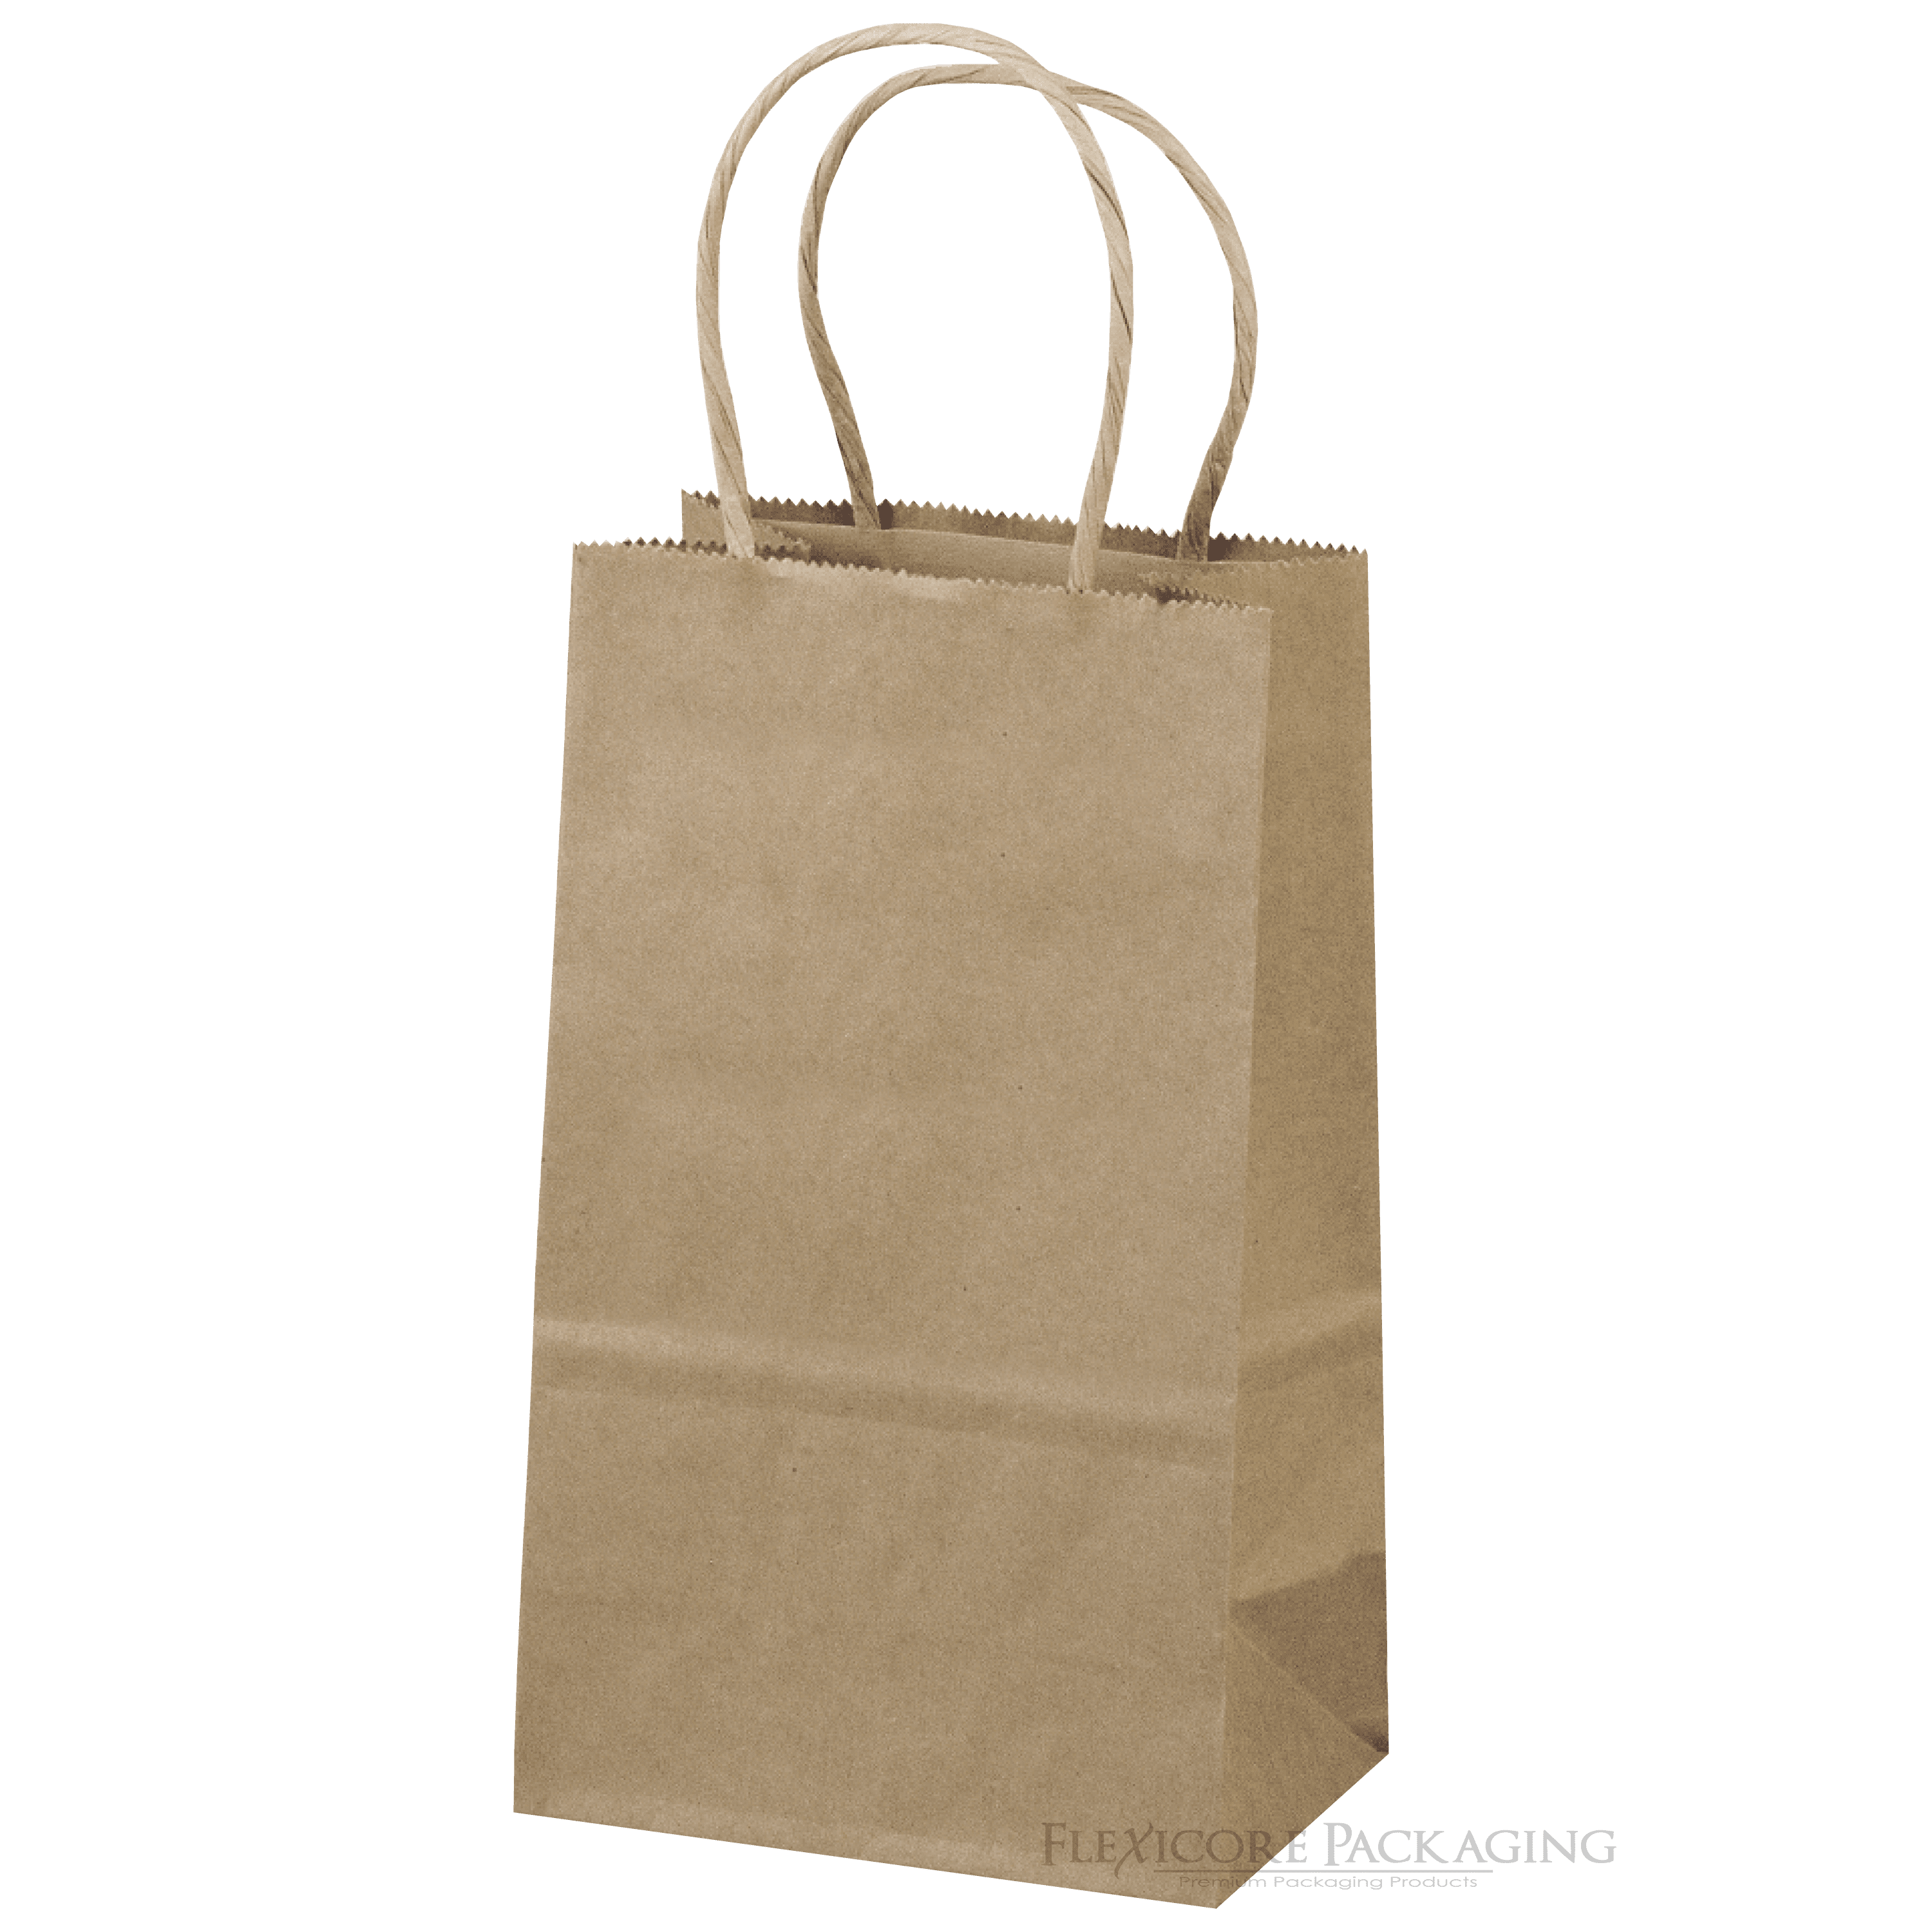 Recyclable Luxury Kraft Paper Party Bags with Handles Loot Bag Gift Bag Shopping 